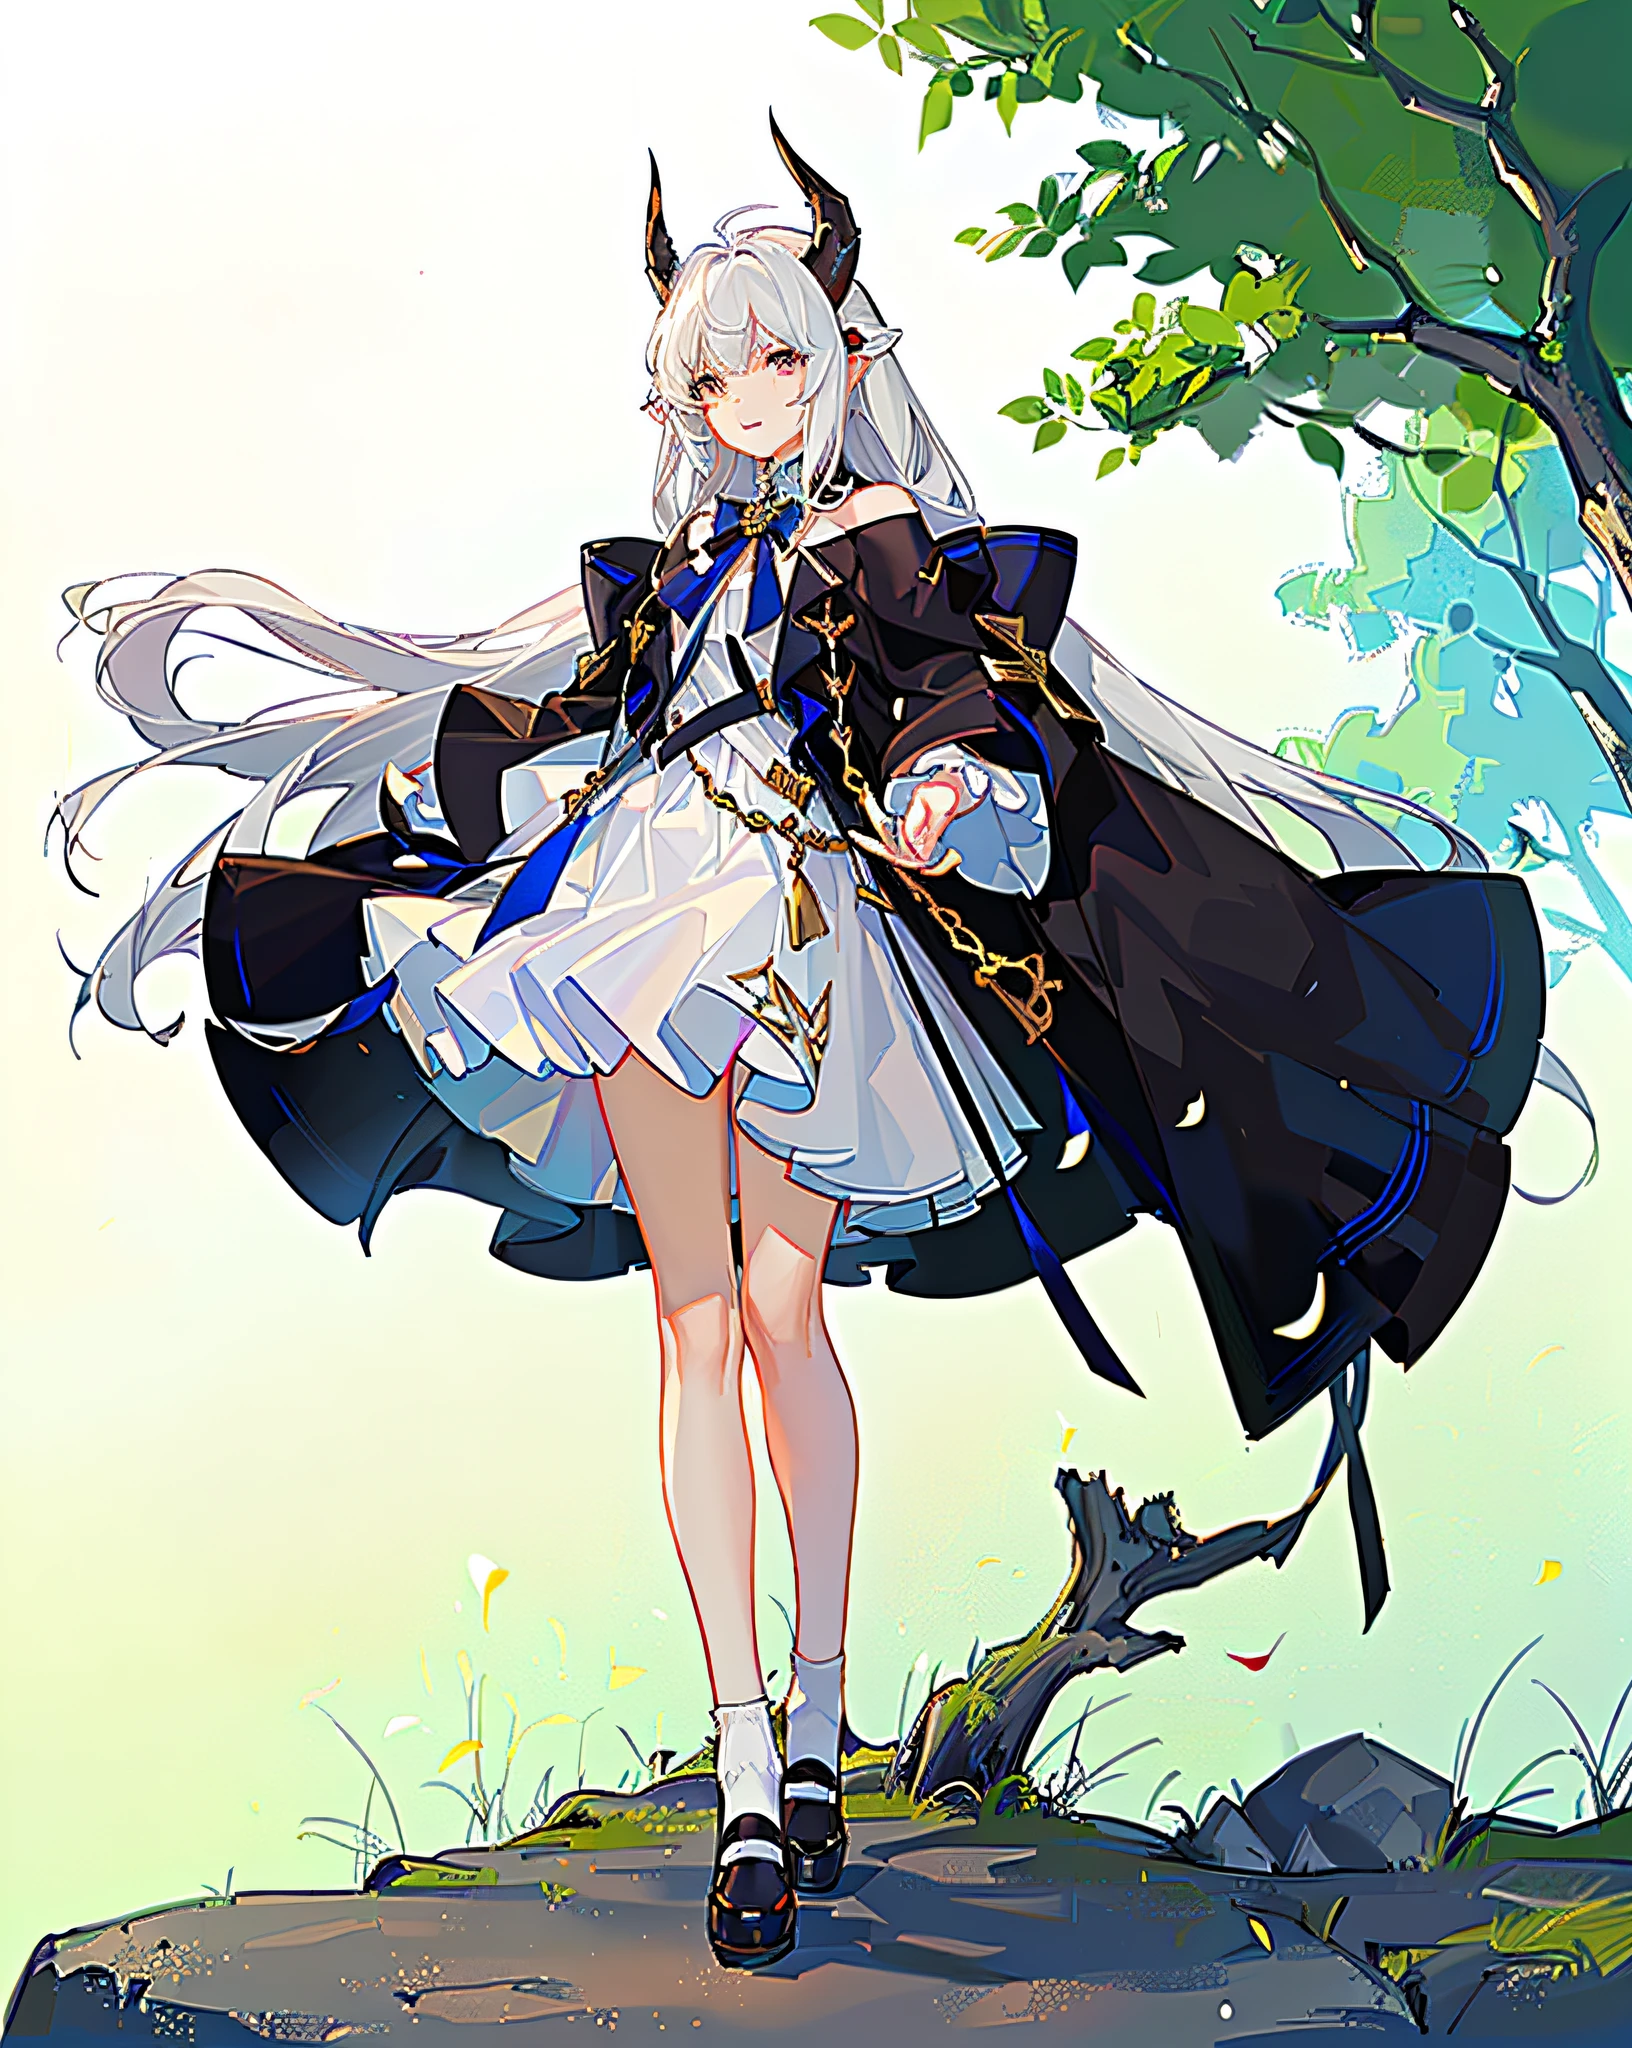 Best quality, super high resolution, super fine face and eyes, white socks, jewel clothing, clothes with complex patterns, single standing position, normal standing position, background removed, white medium hair in front, long black hair at back, horns on the head